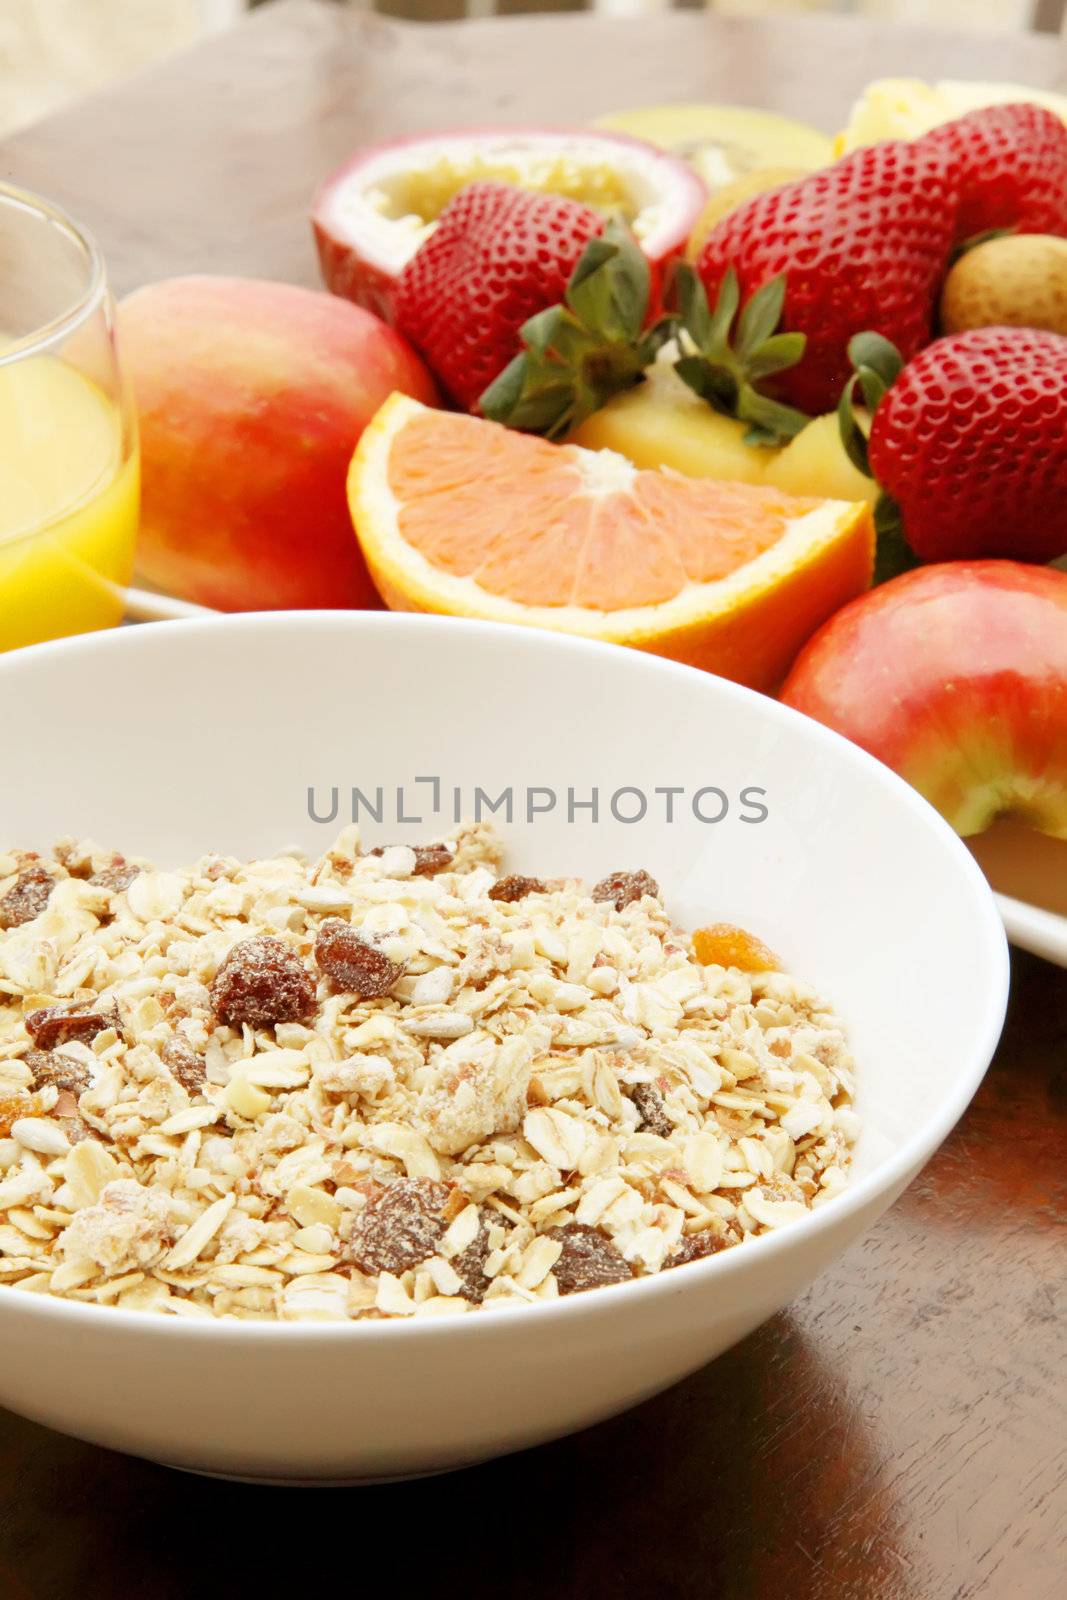 Muesli with Fresh Fruits on a Plate